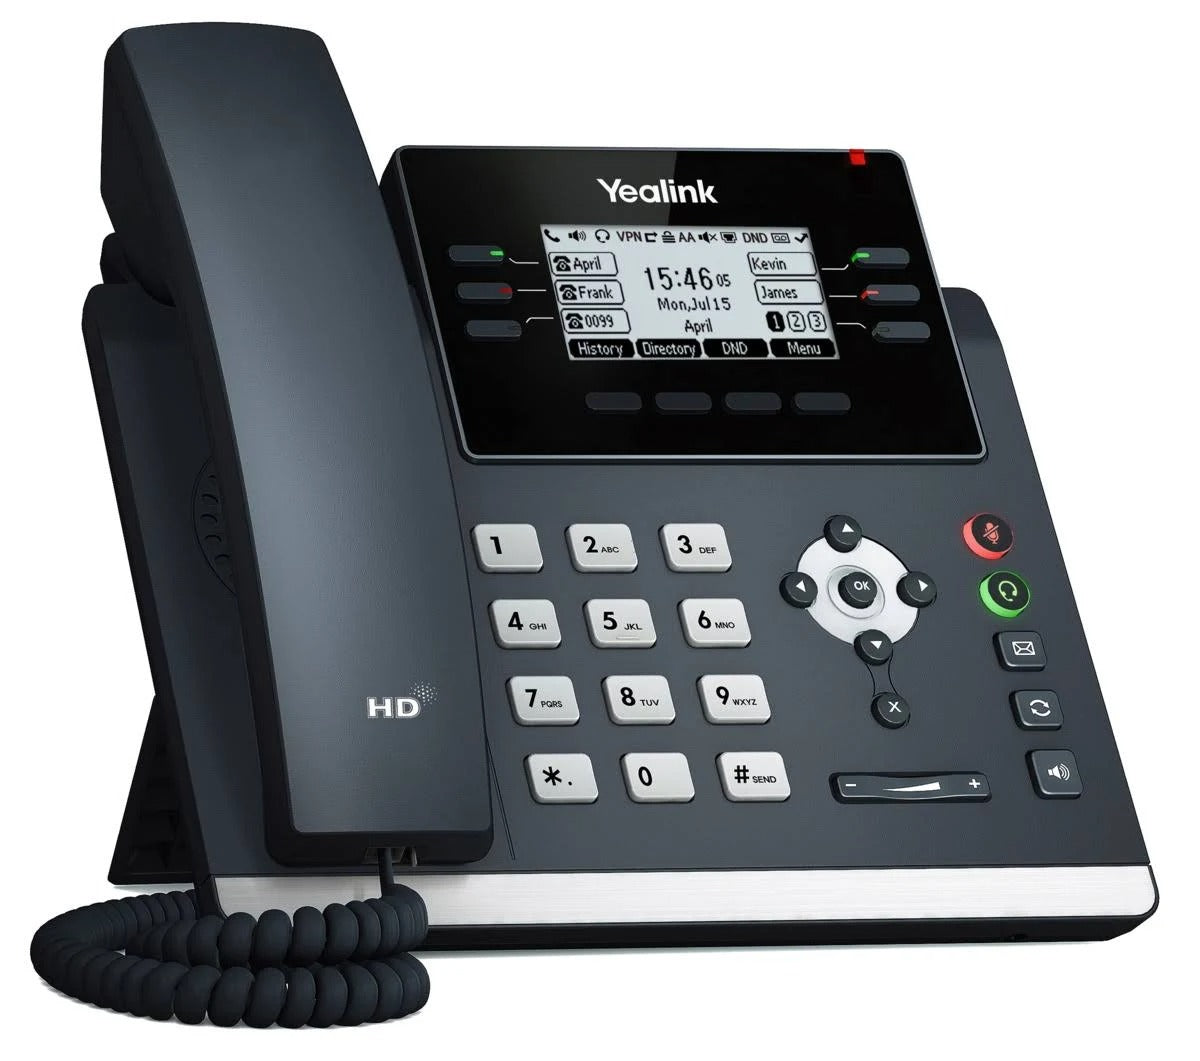 Yealink T42U-CL IP Desk Phone without Charger Adapter - Black (Refurbished)